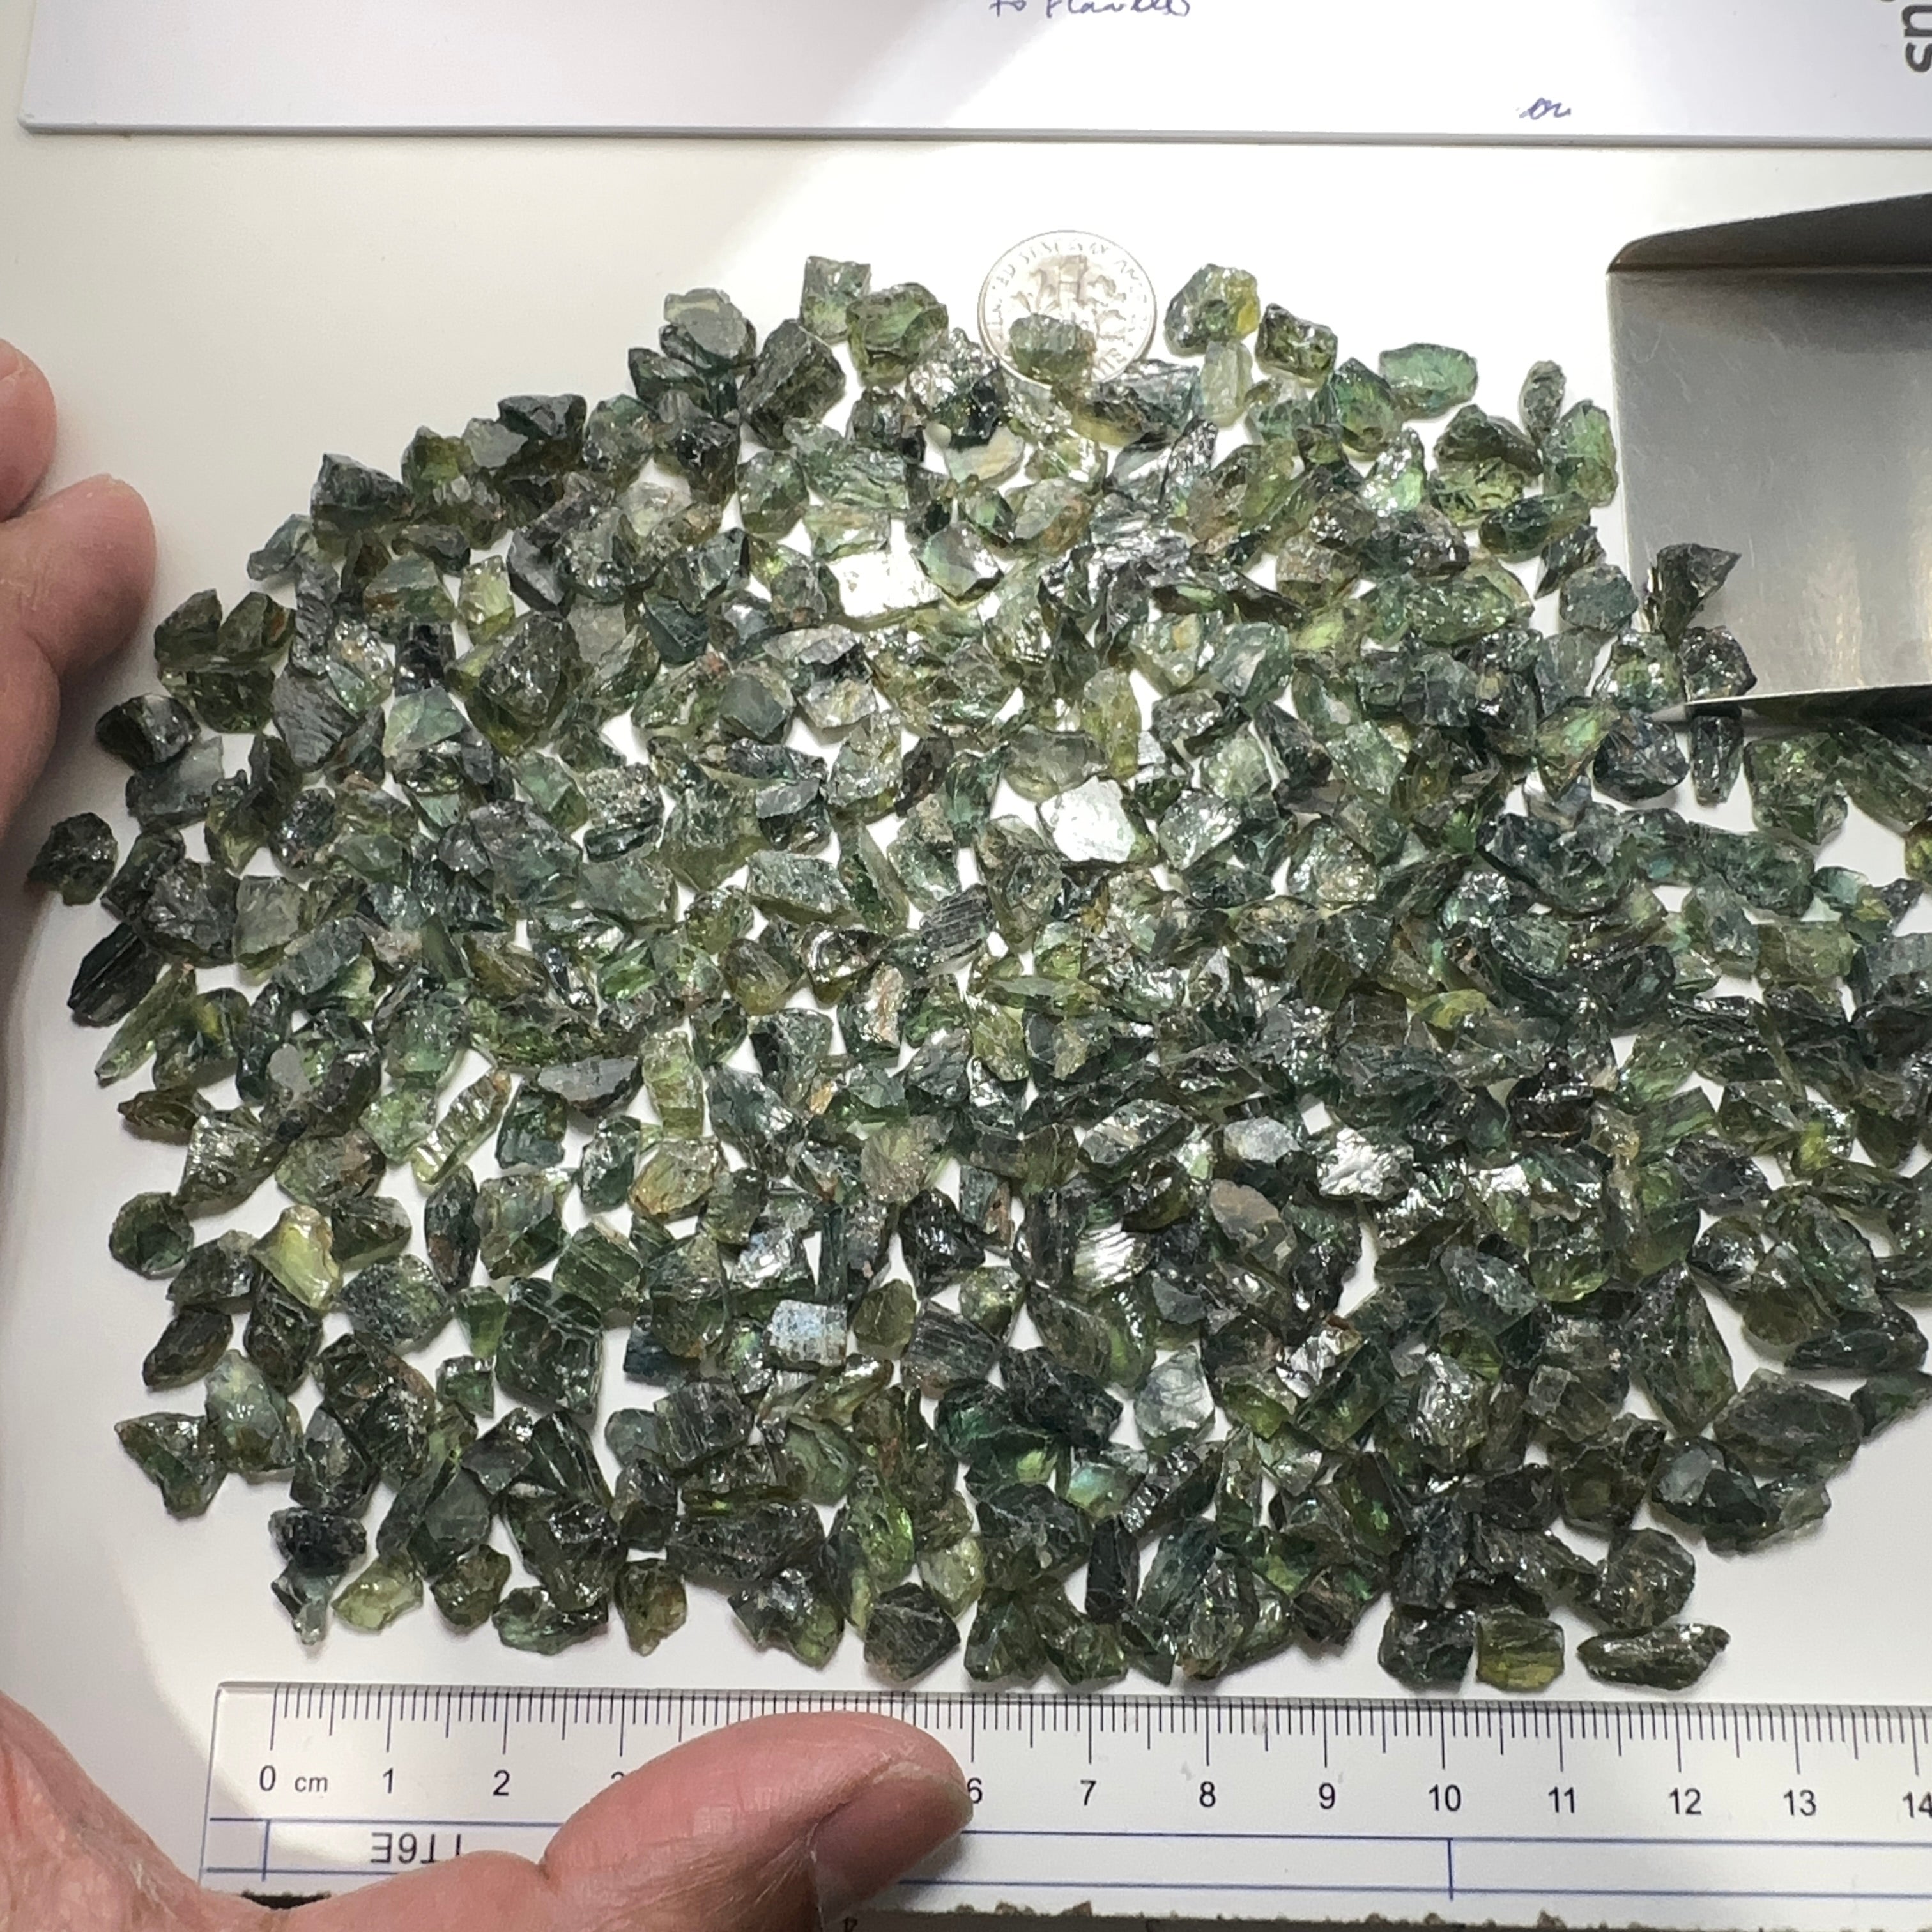 880ct / 176gm Kenyan Sapphire Lot, Garbatulla Mine, Untreated, transparent stones for setting/casting as is into jewellery